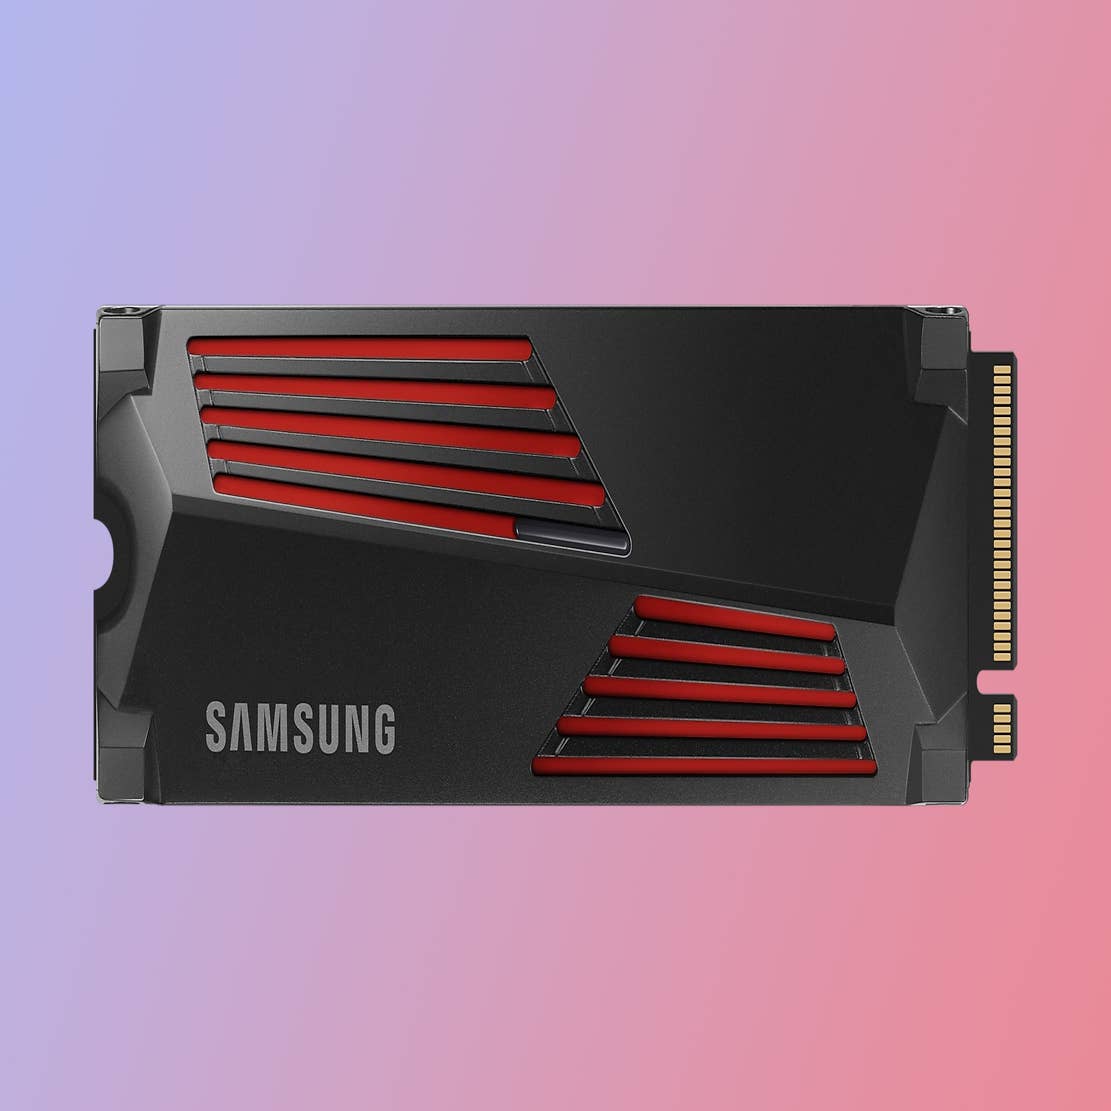 Lowest Price Ever on the Samsung 990 Pro, the Fastest PCIe Gen4 SSD on the  Market - IGN